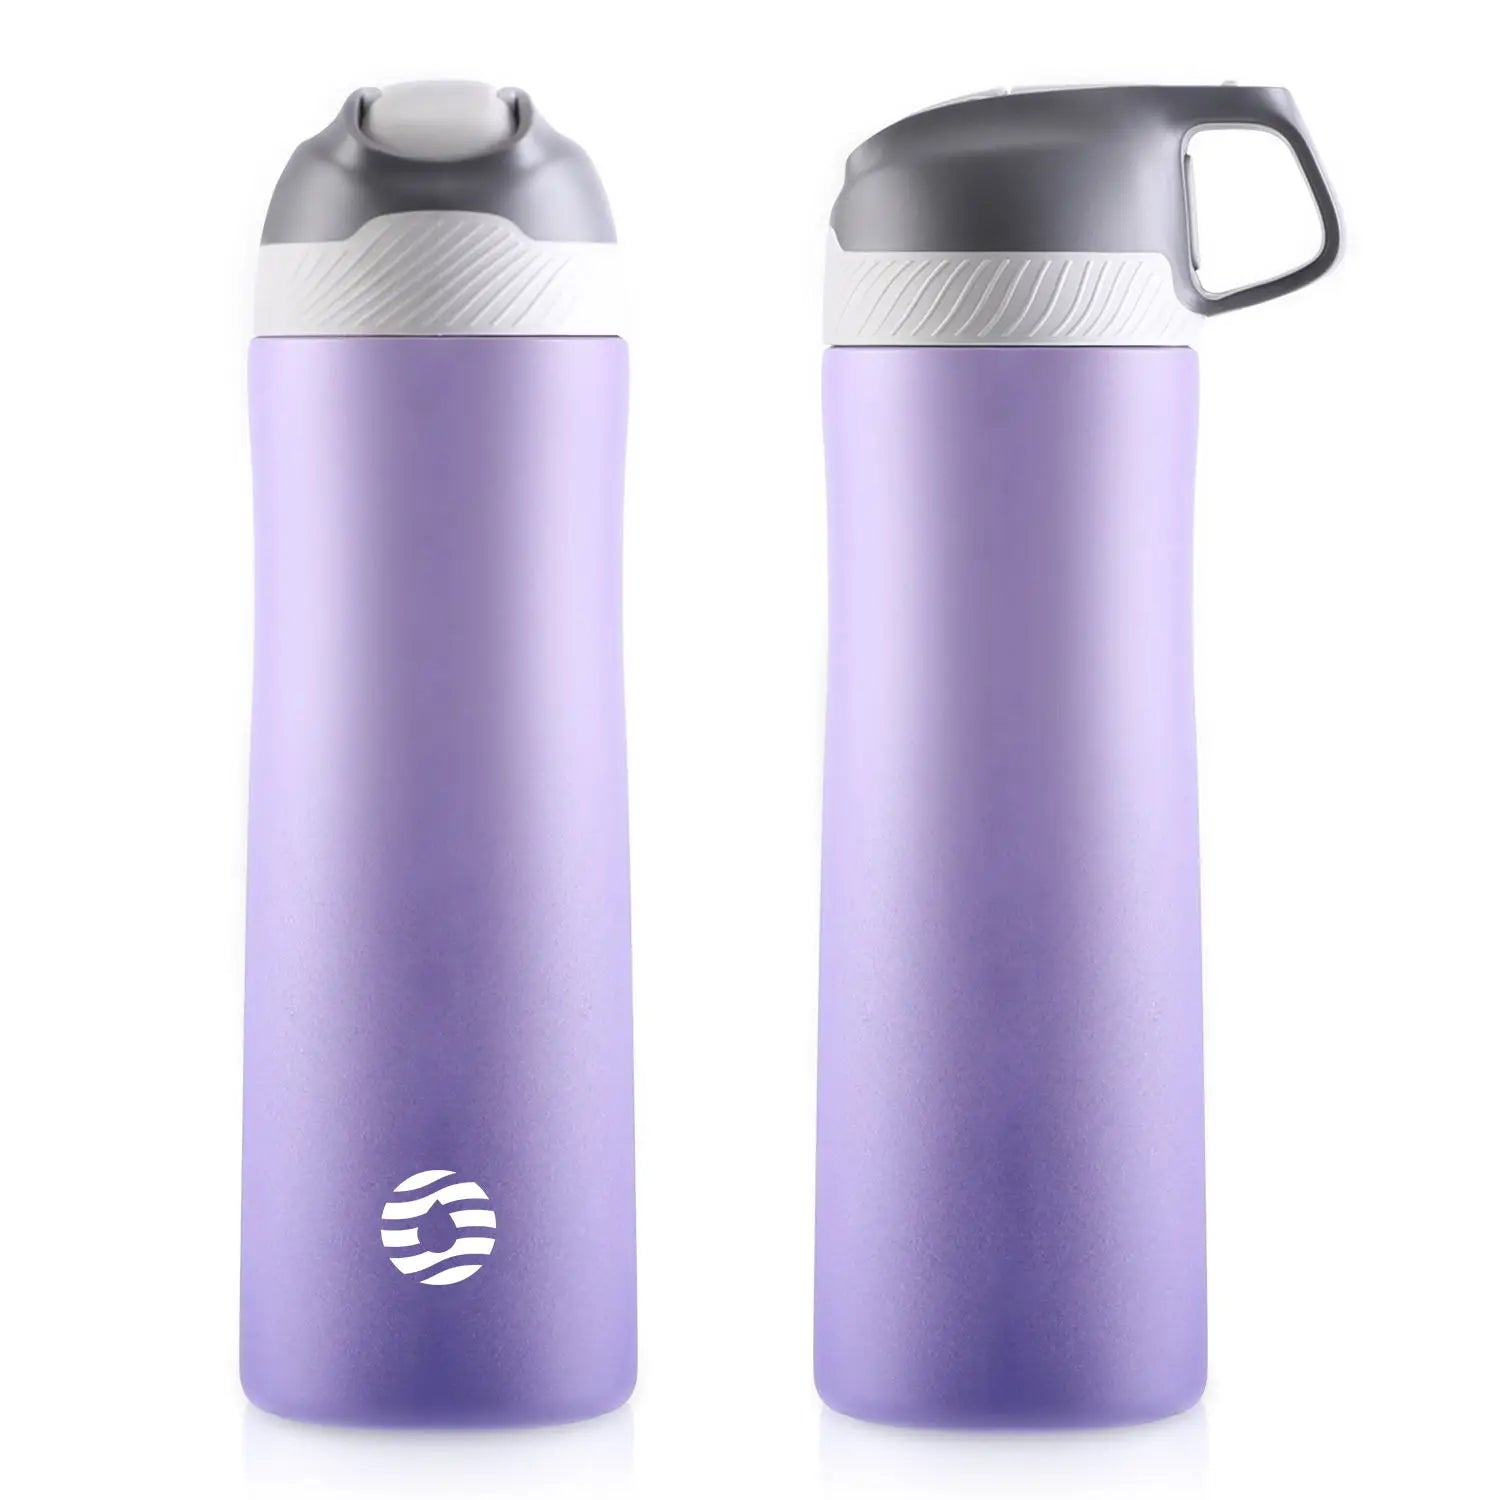 FEIJIAN Insulated Water Bottle with Straw Lid Double Wall Thermos Stainless Steel Gradient Purple550ml 550-710ml